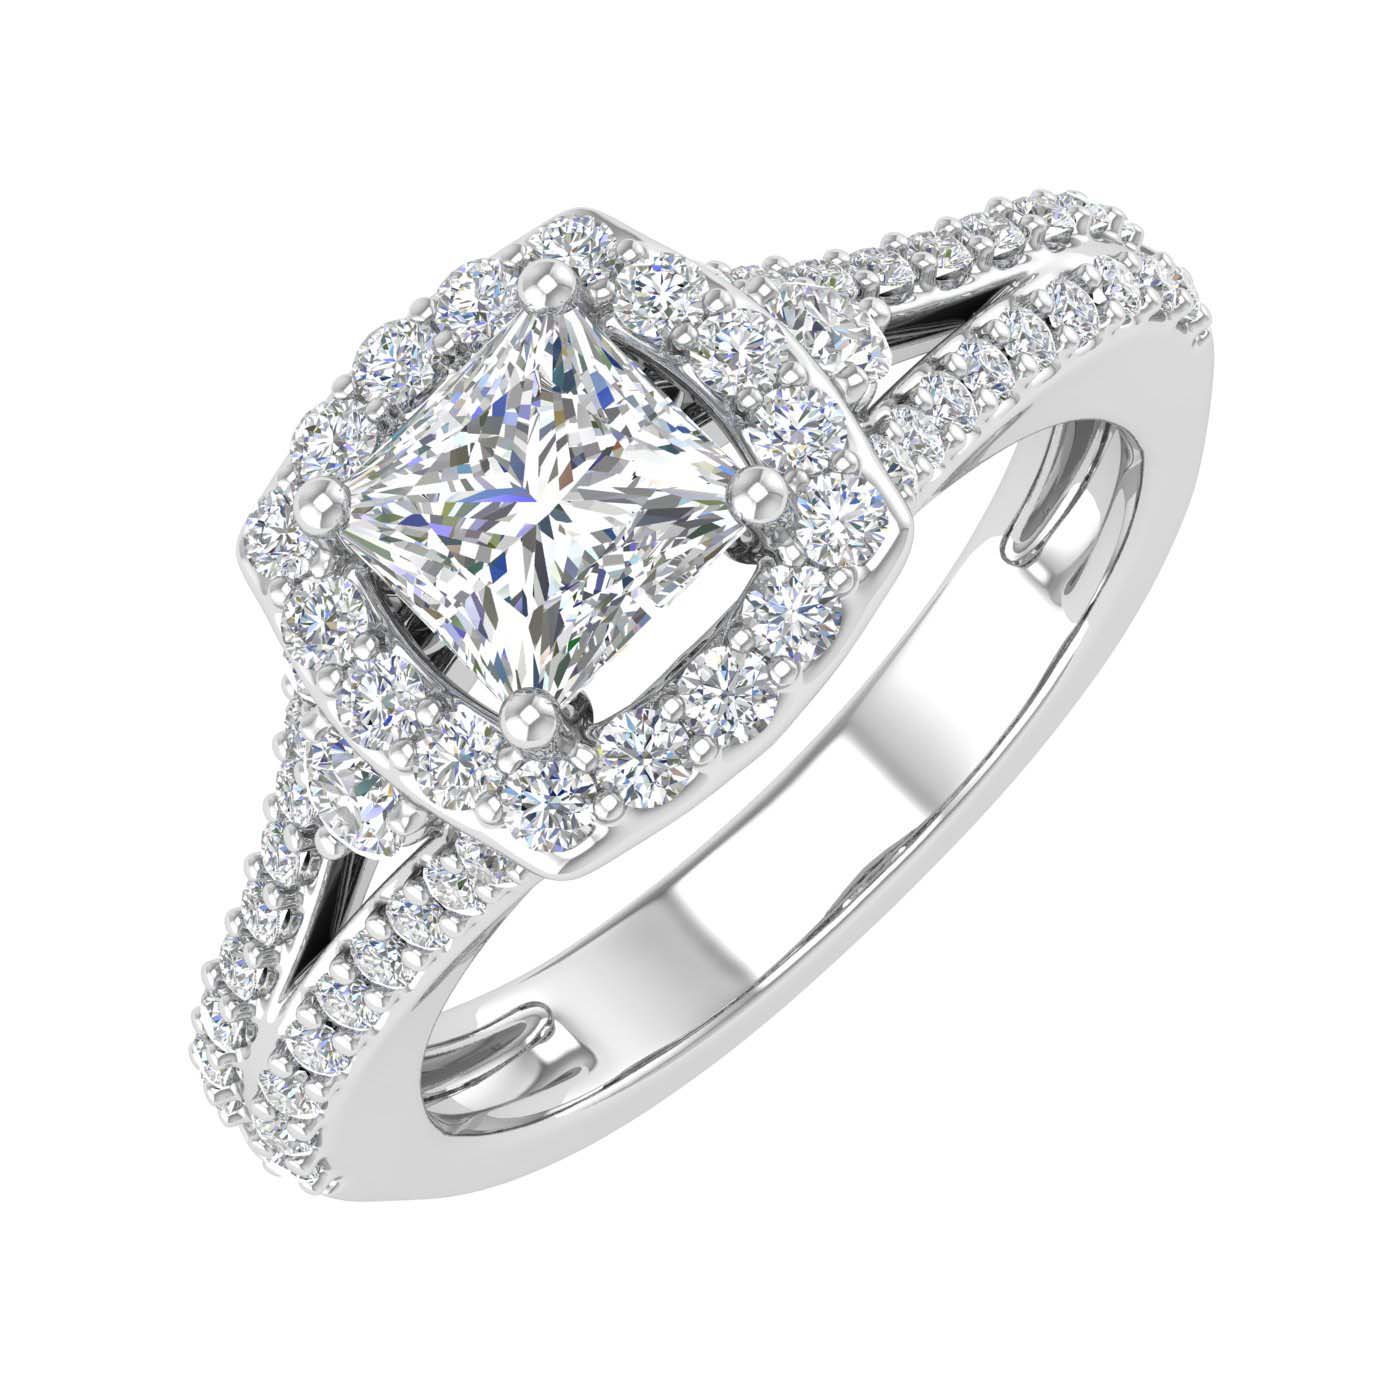 1.15 Carat Round and Princess Cut Diamond Halo Engagement Ring in Gold ...